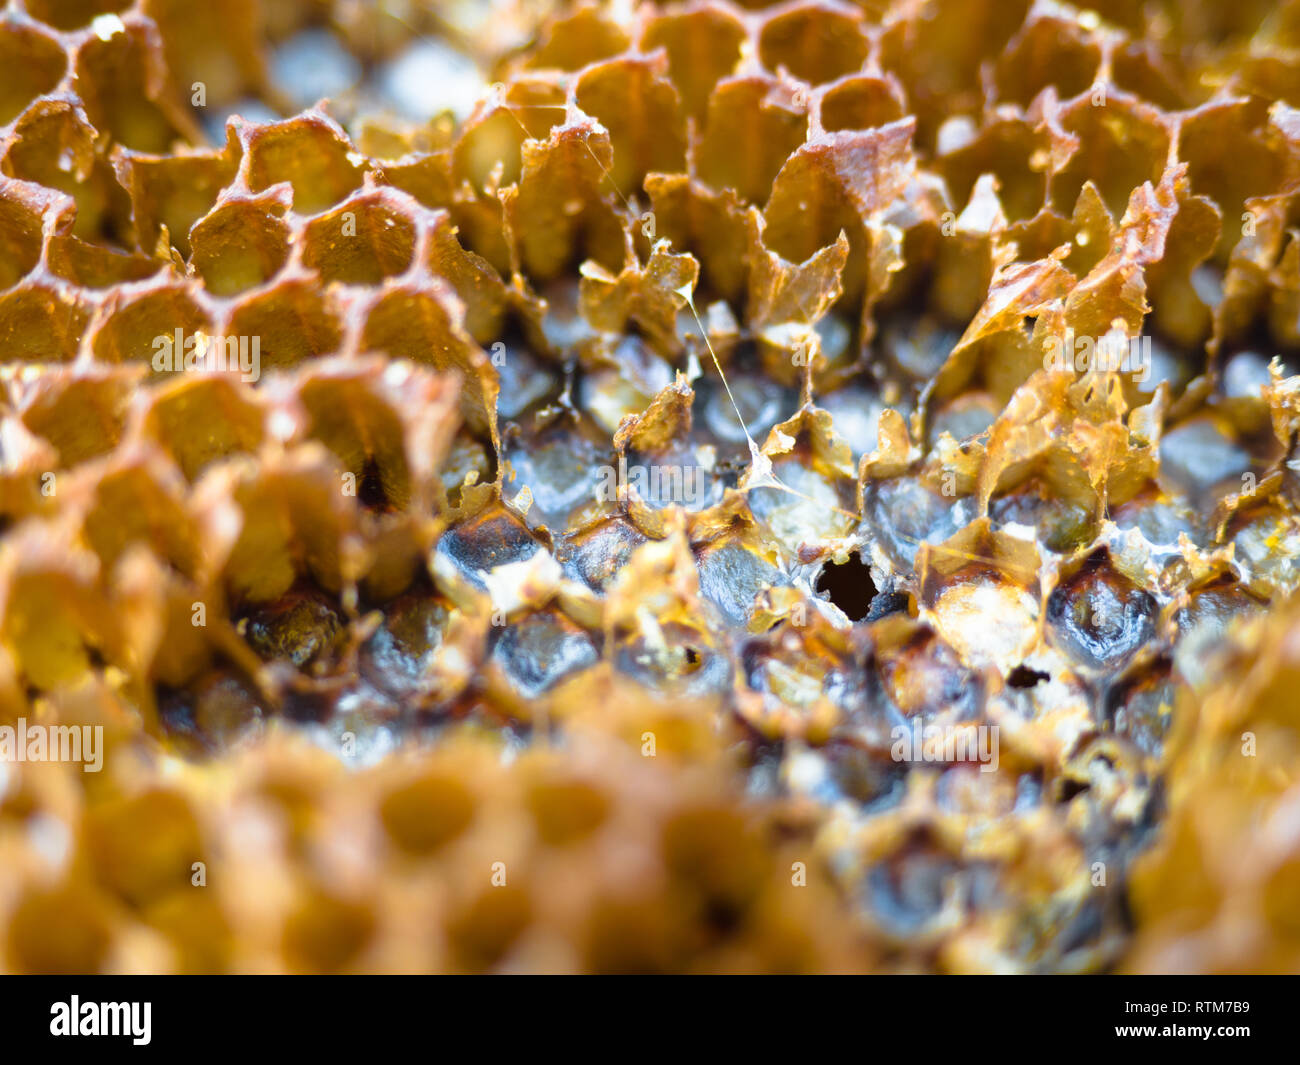 Texture background of bee wax and honey from a hive, organic and healthy food. Stock Photo